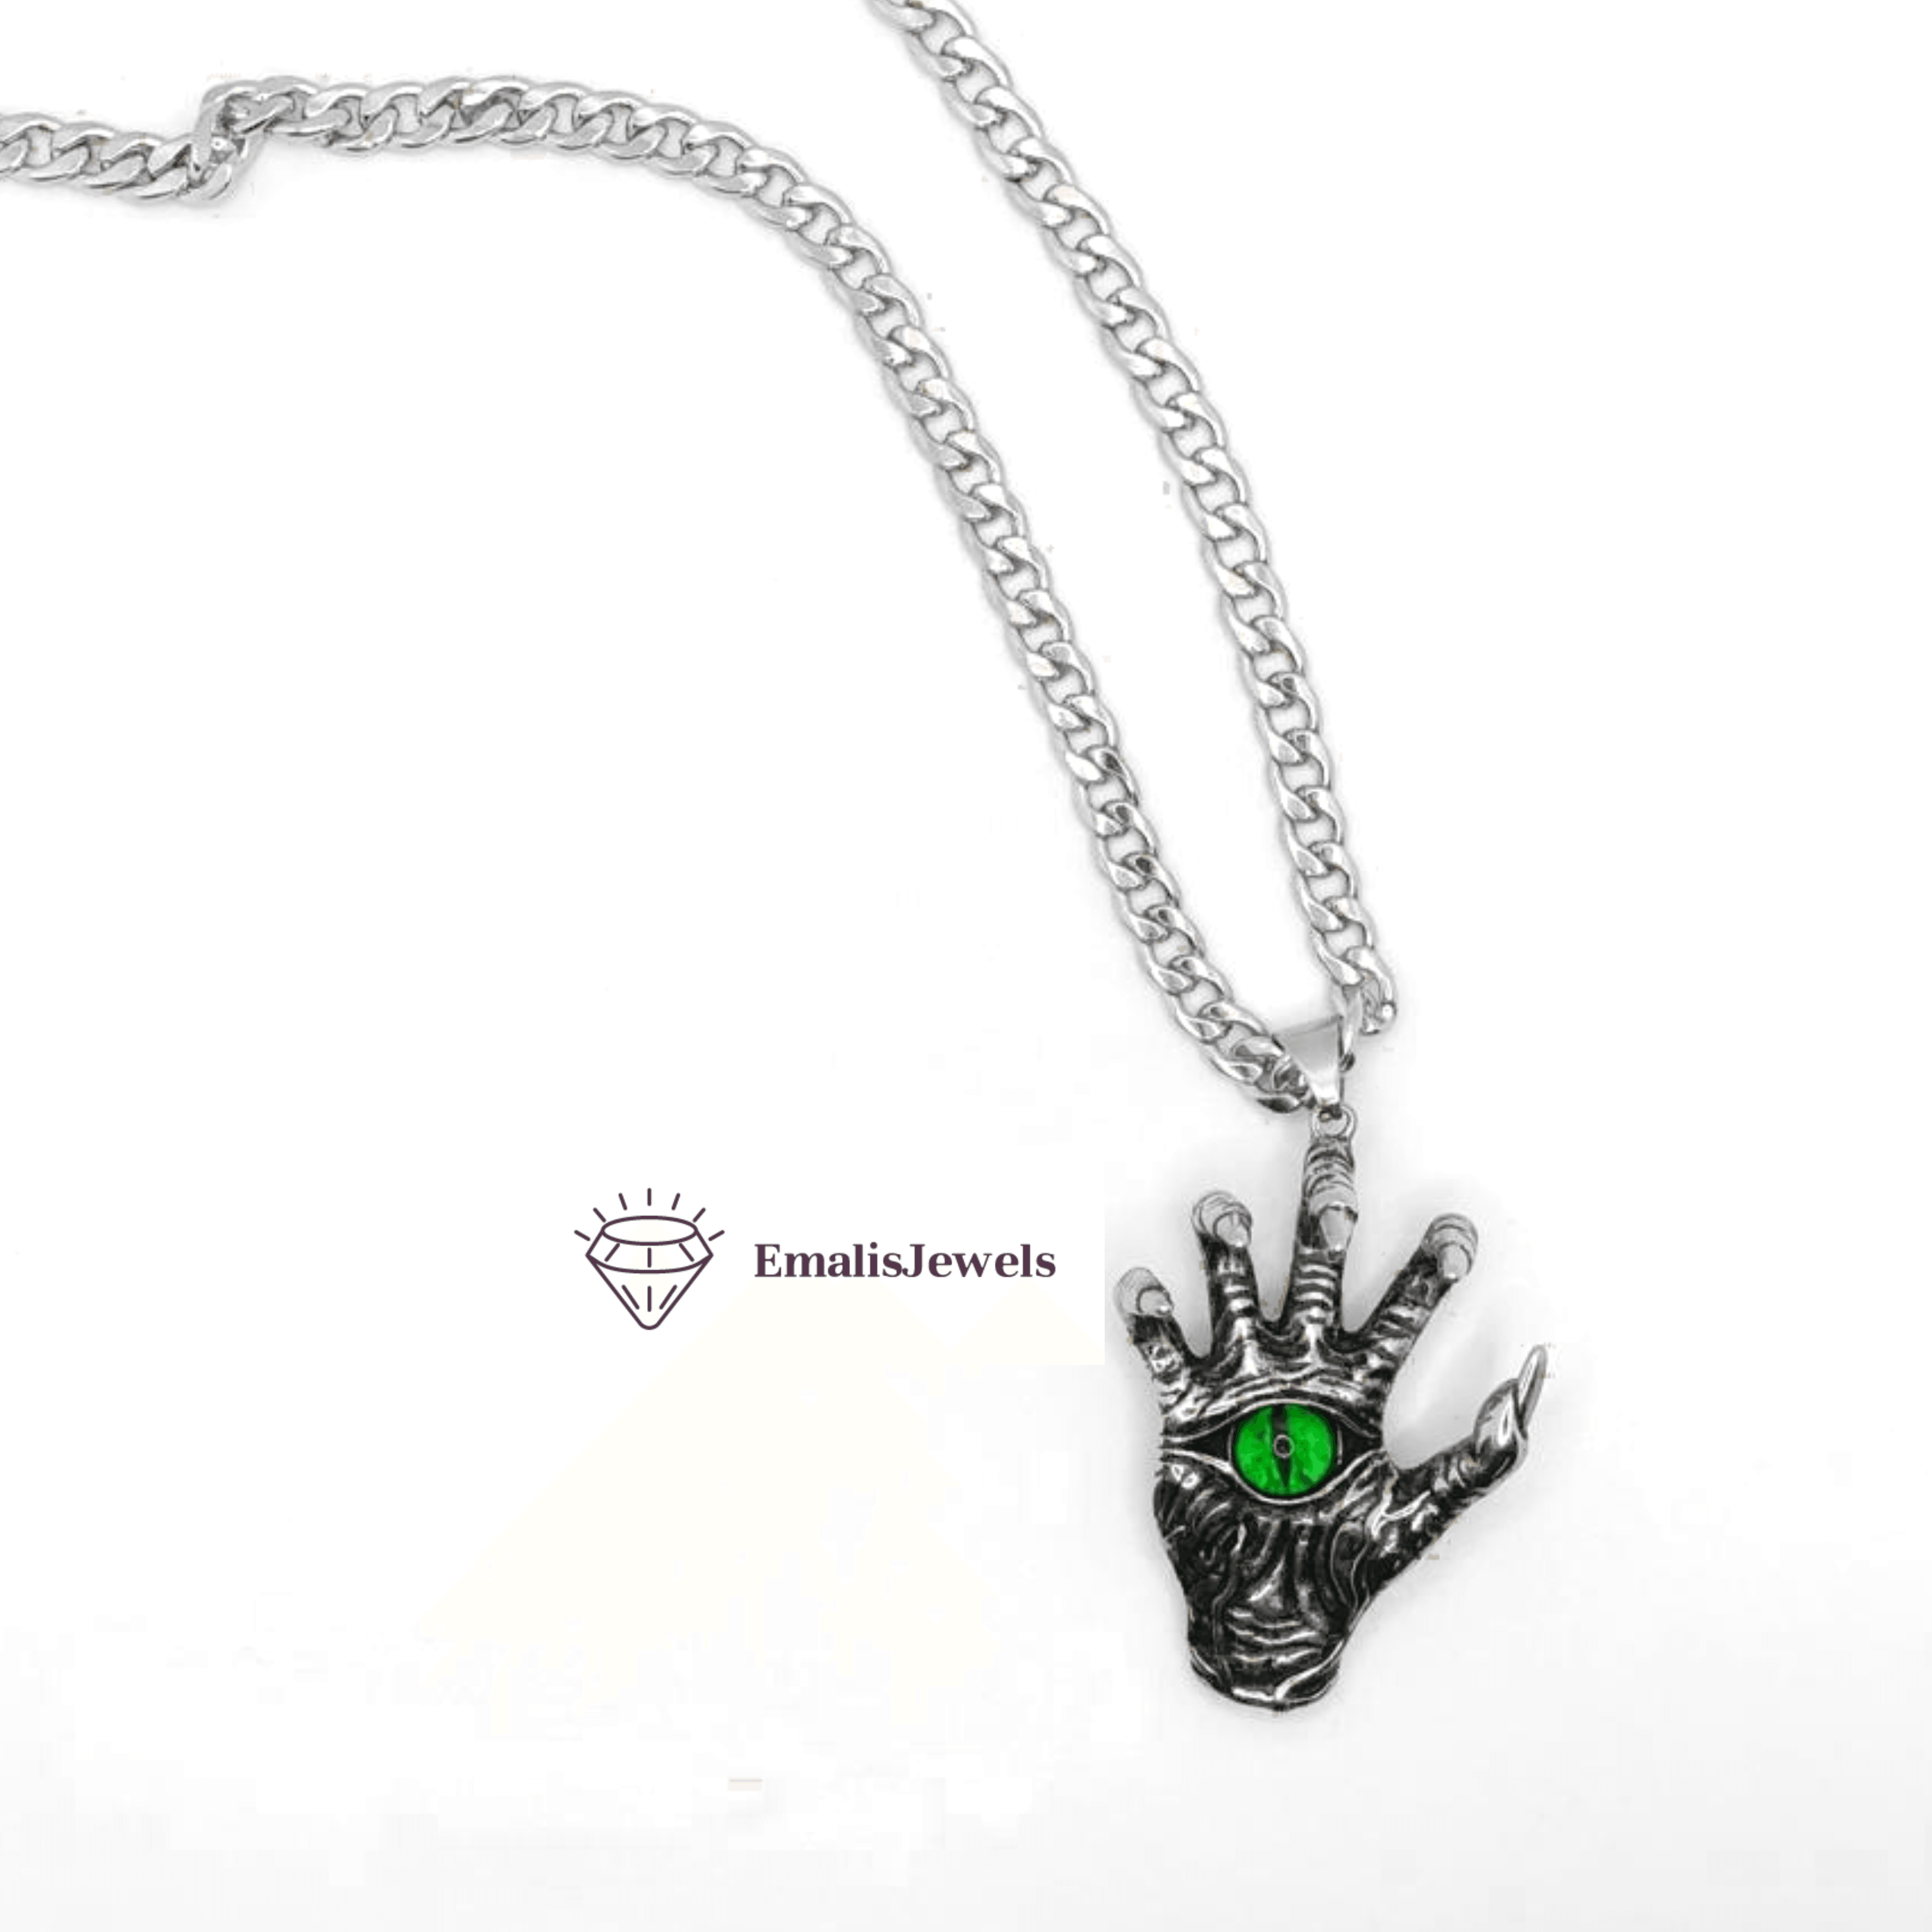 Stainless Steel Chain Necklace and Stainless Steel Hand/Green Eye Pendant